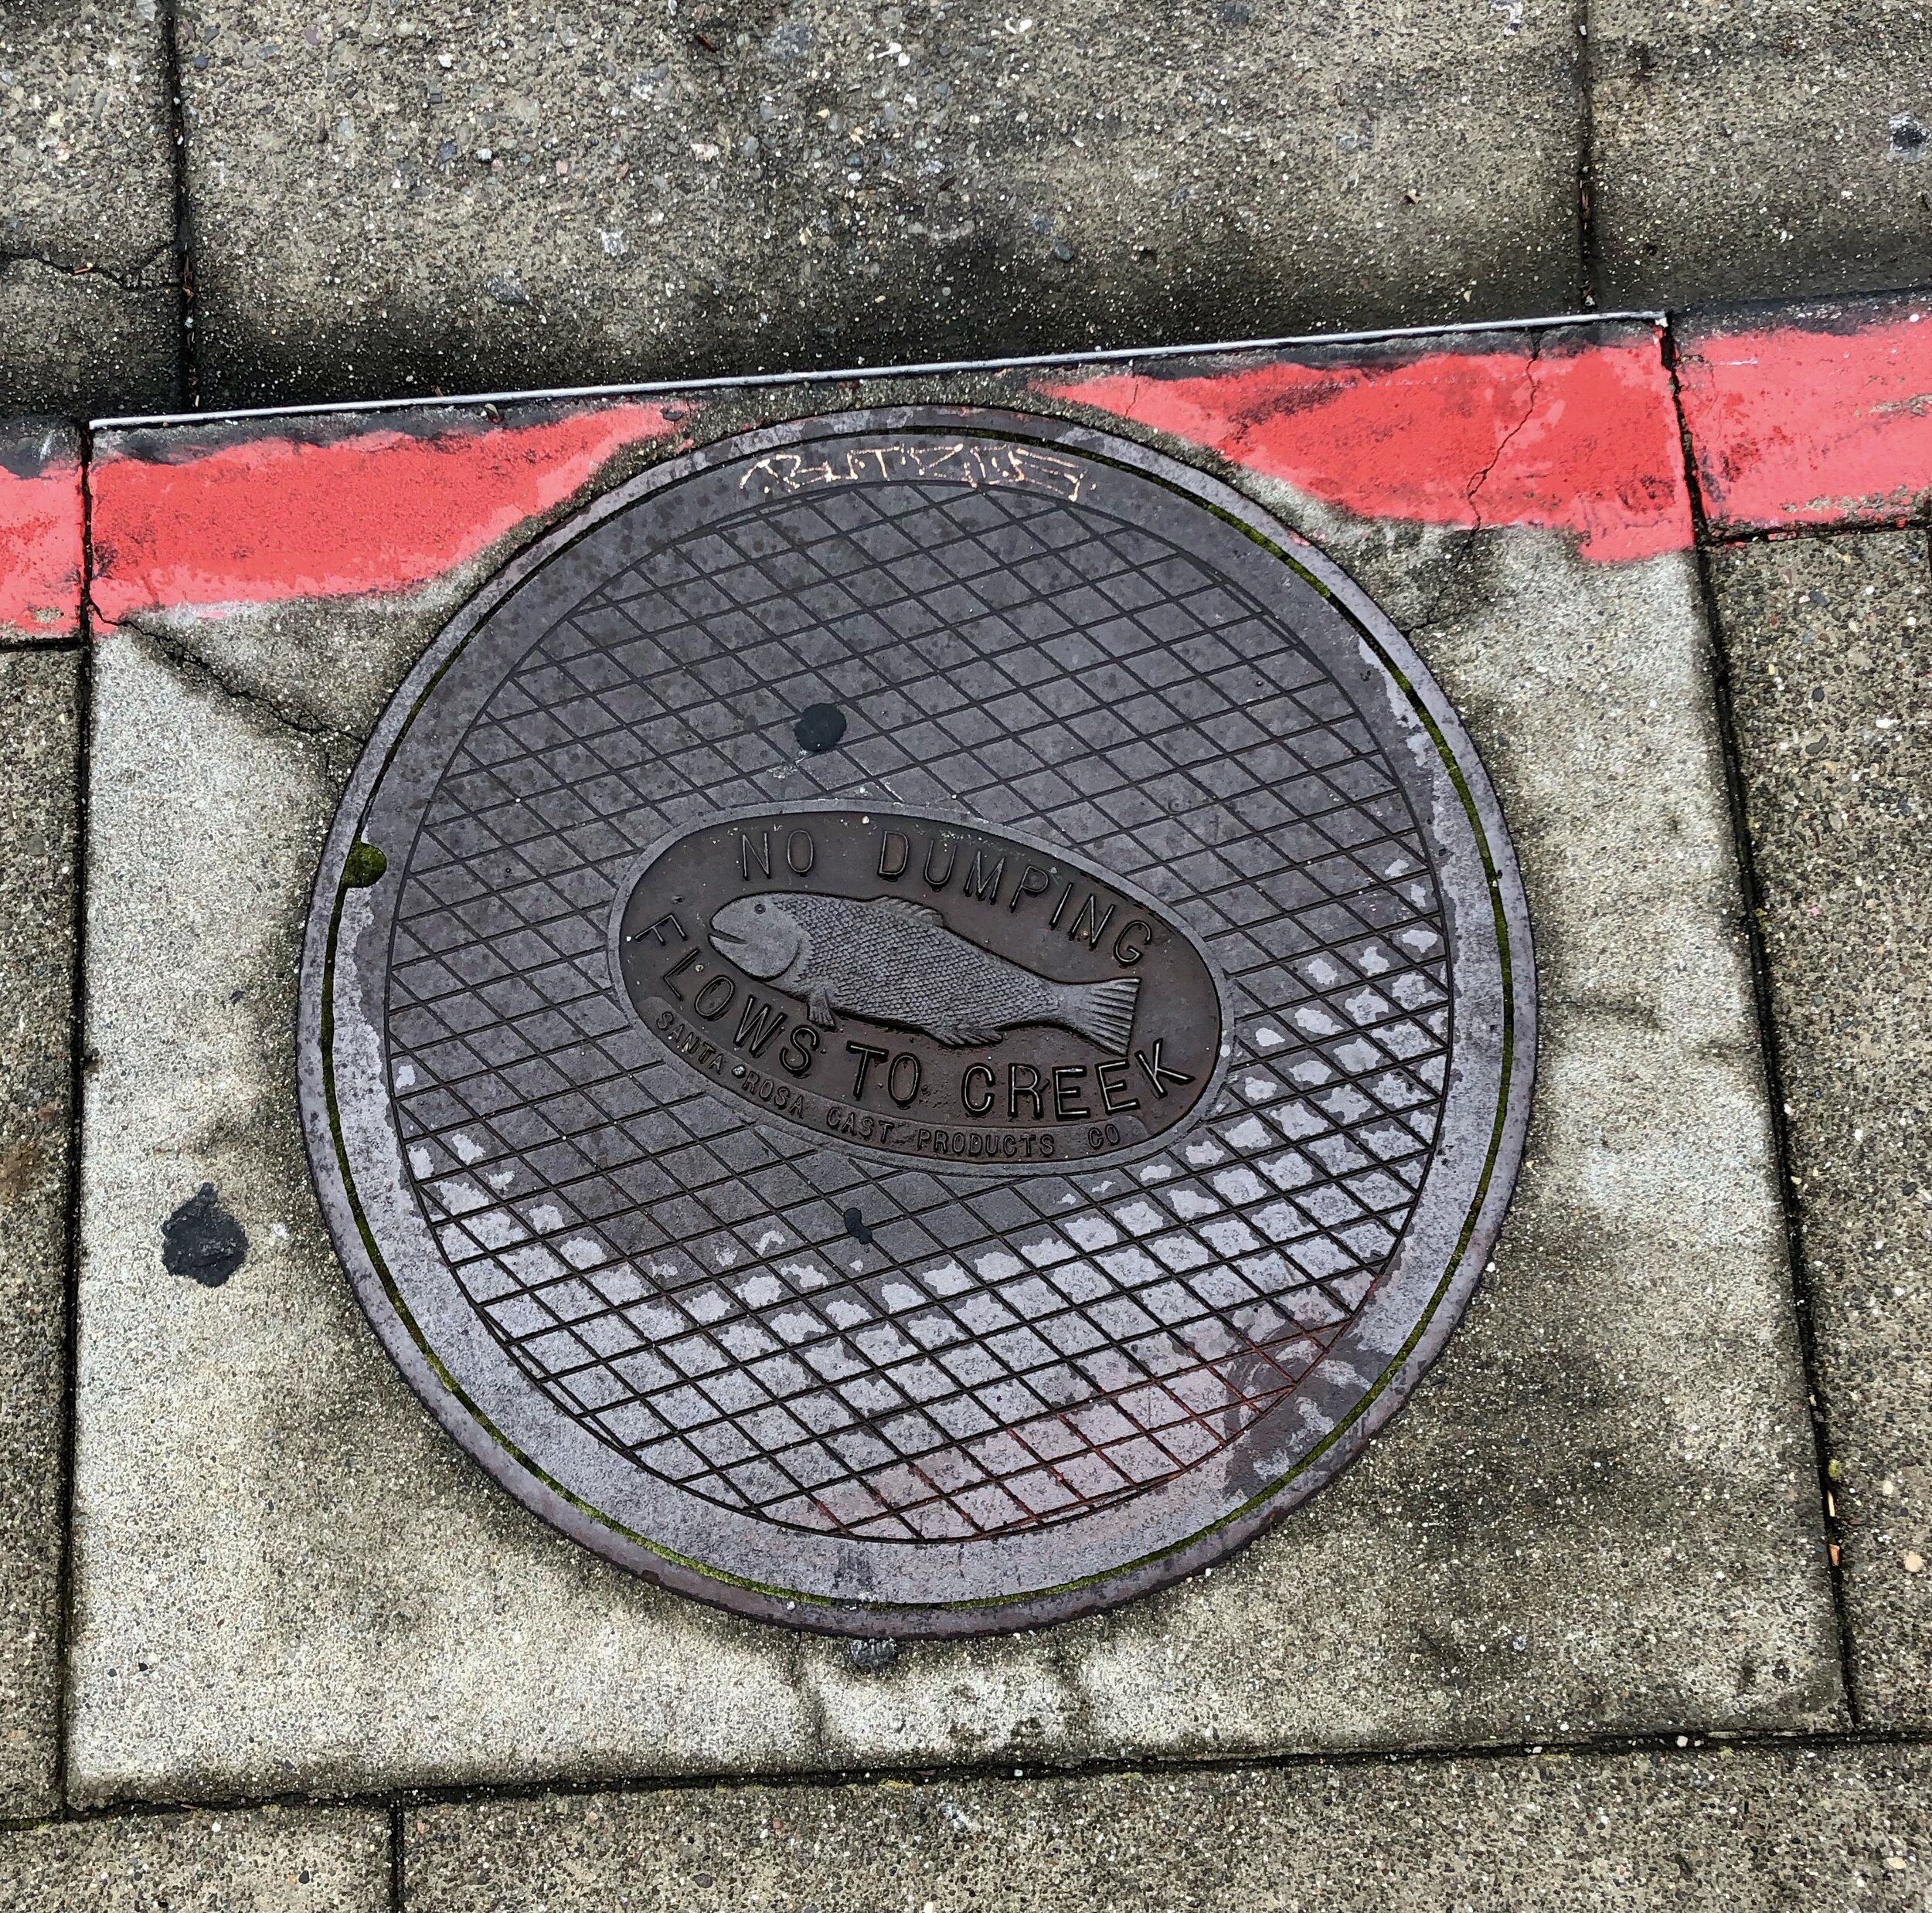 Mars &amp; Kohlstedt also have a section on manhole covers.